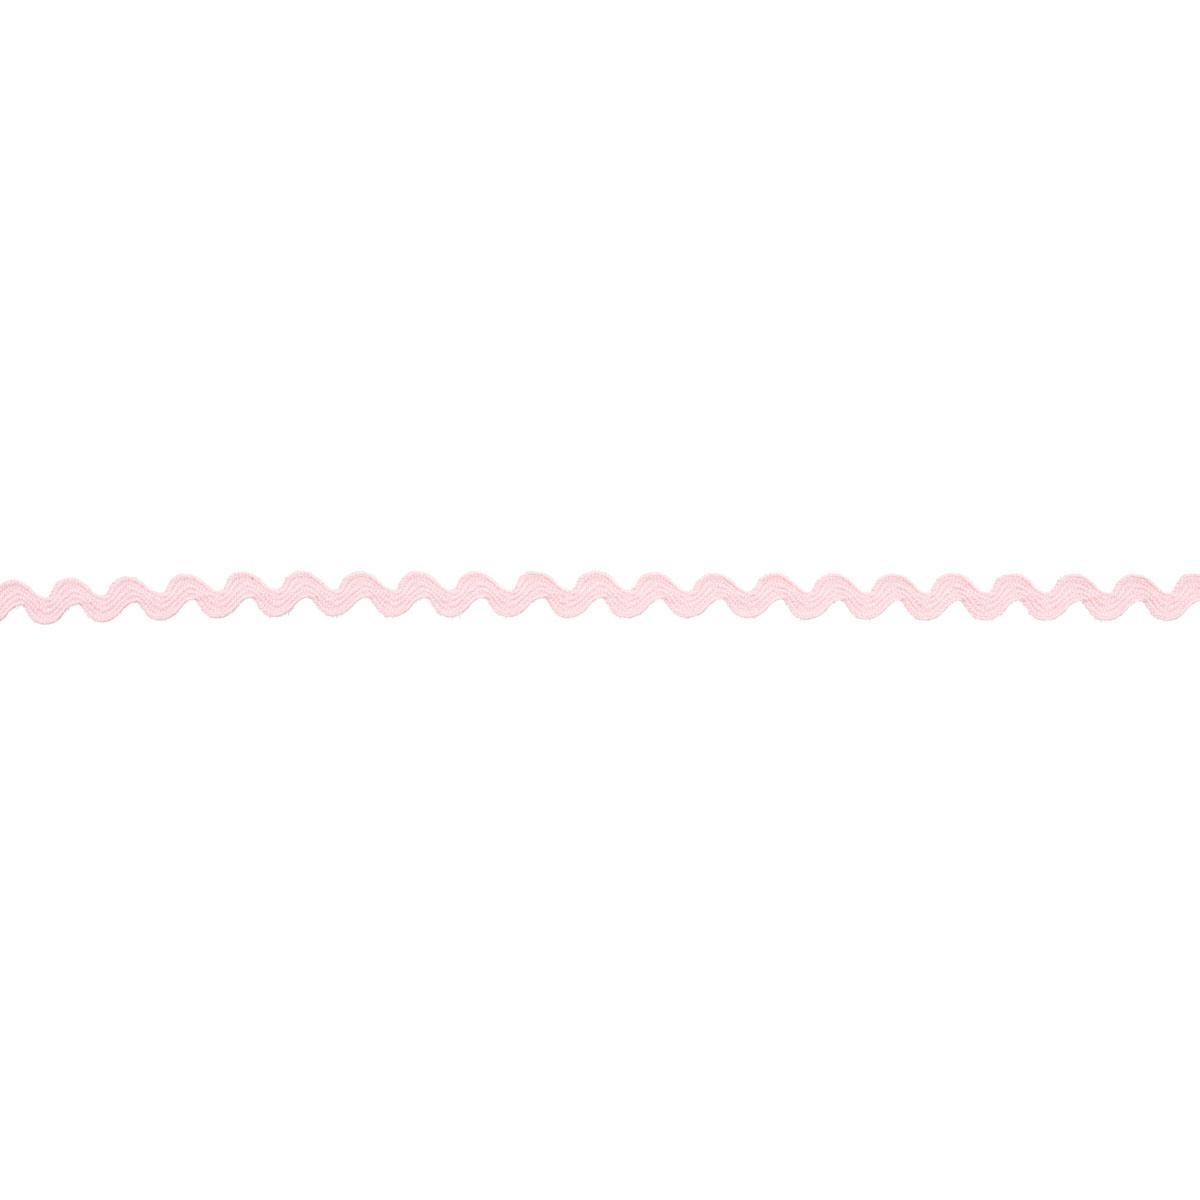 RIC RAC TAPE SMALL_PALE PINK